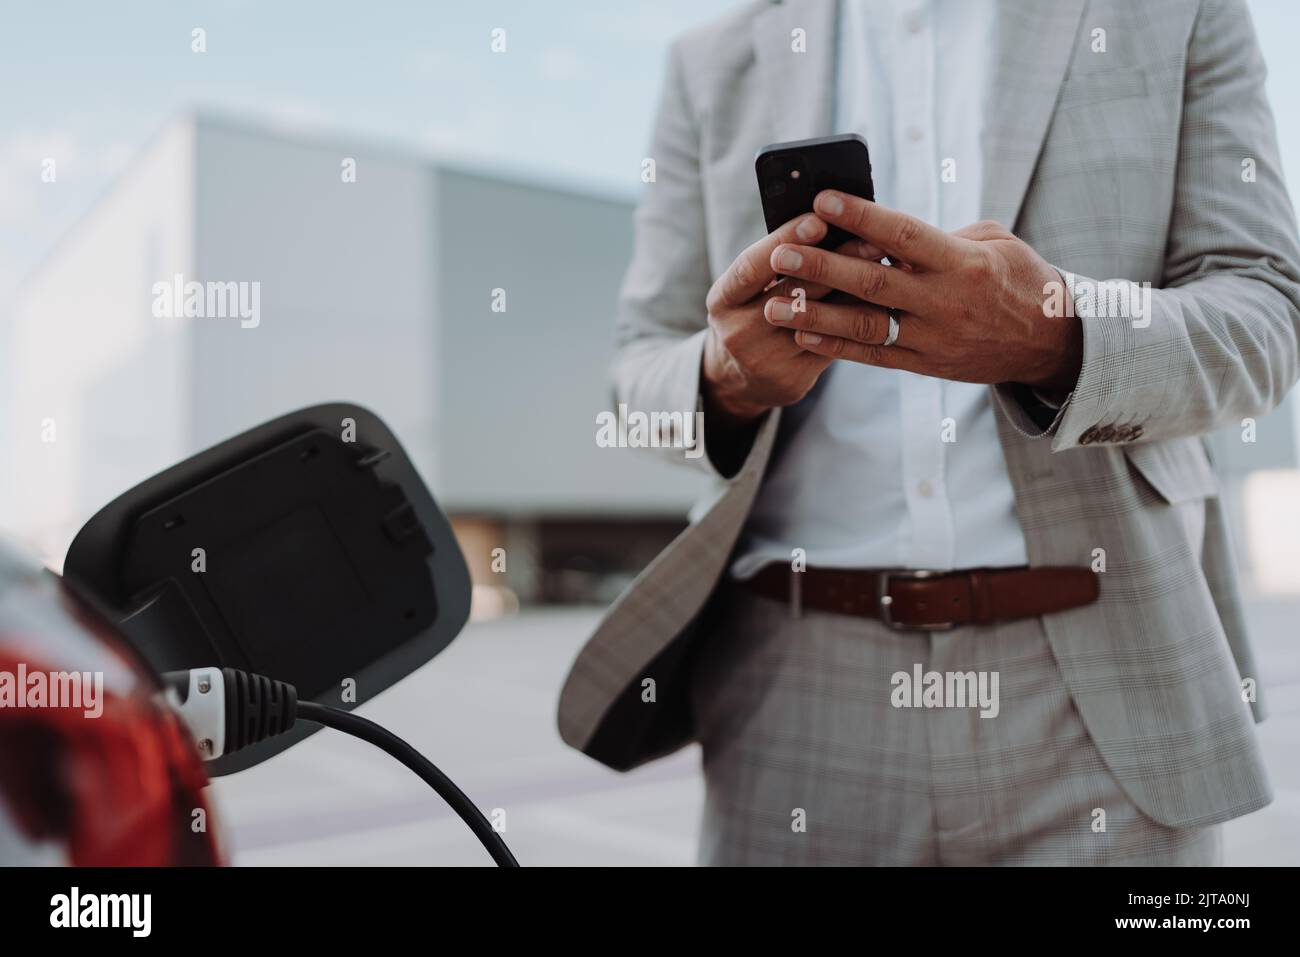 Man holding smartphone while charging car at electric vehicle charging station, closeup. Stock Photo